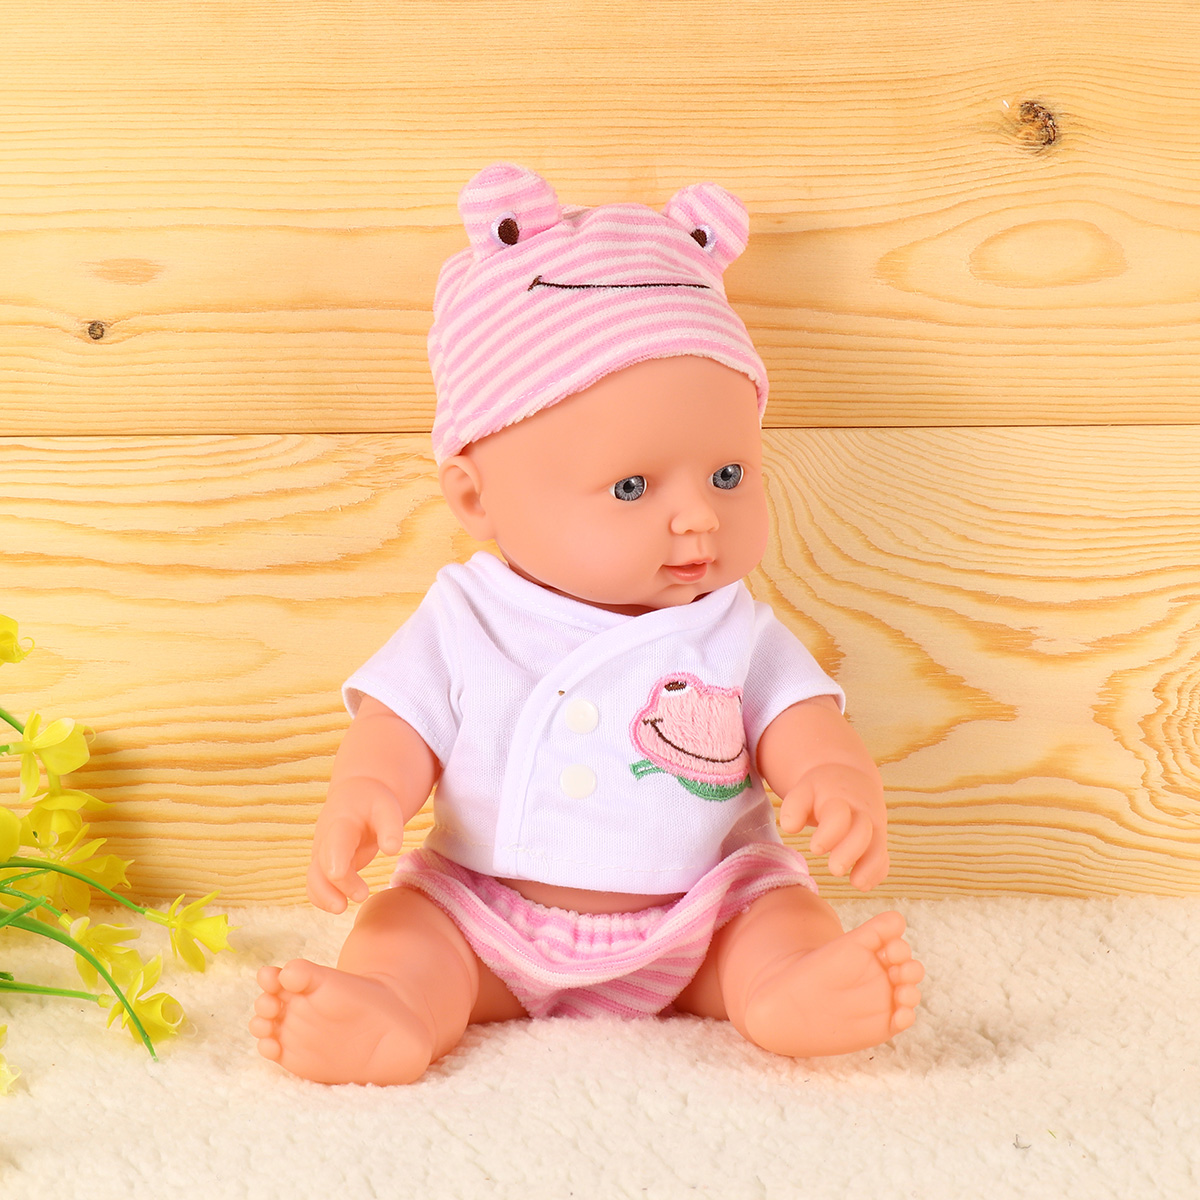 30CM-Height-Simulation-Soft-Silicone-Vinyl-Joint-Removable-Washable-Reborn-Baby-Doll-Toy-for-Kids-Bi-1812138-6